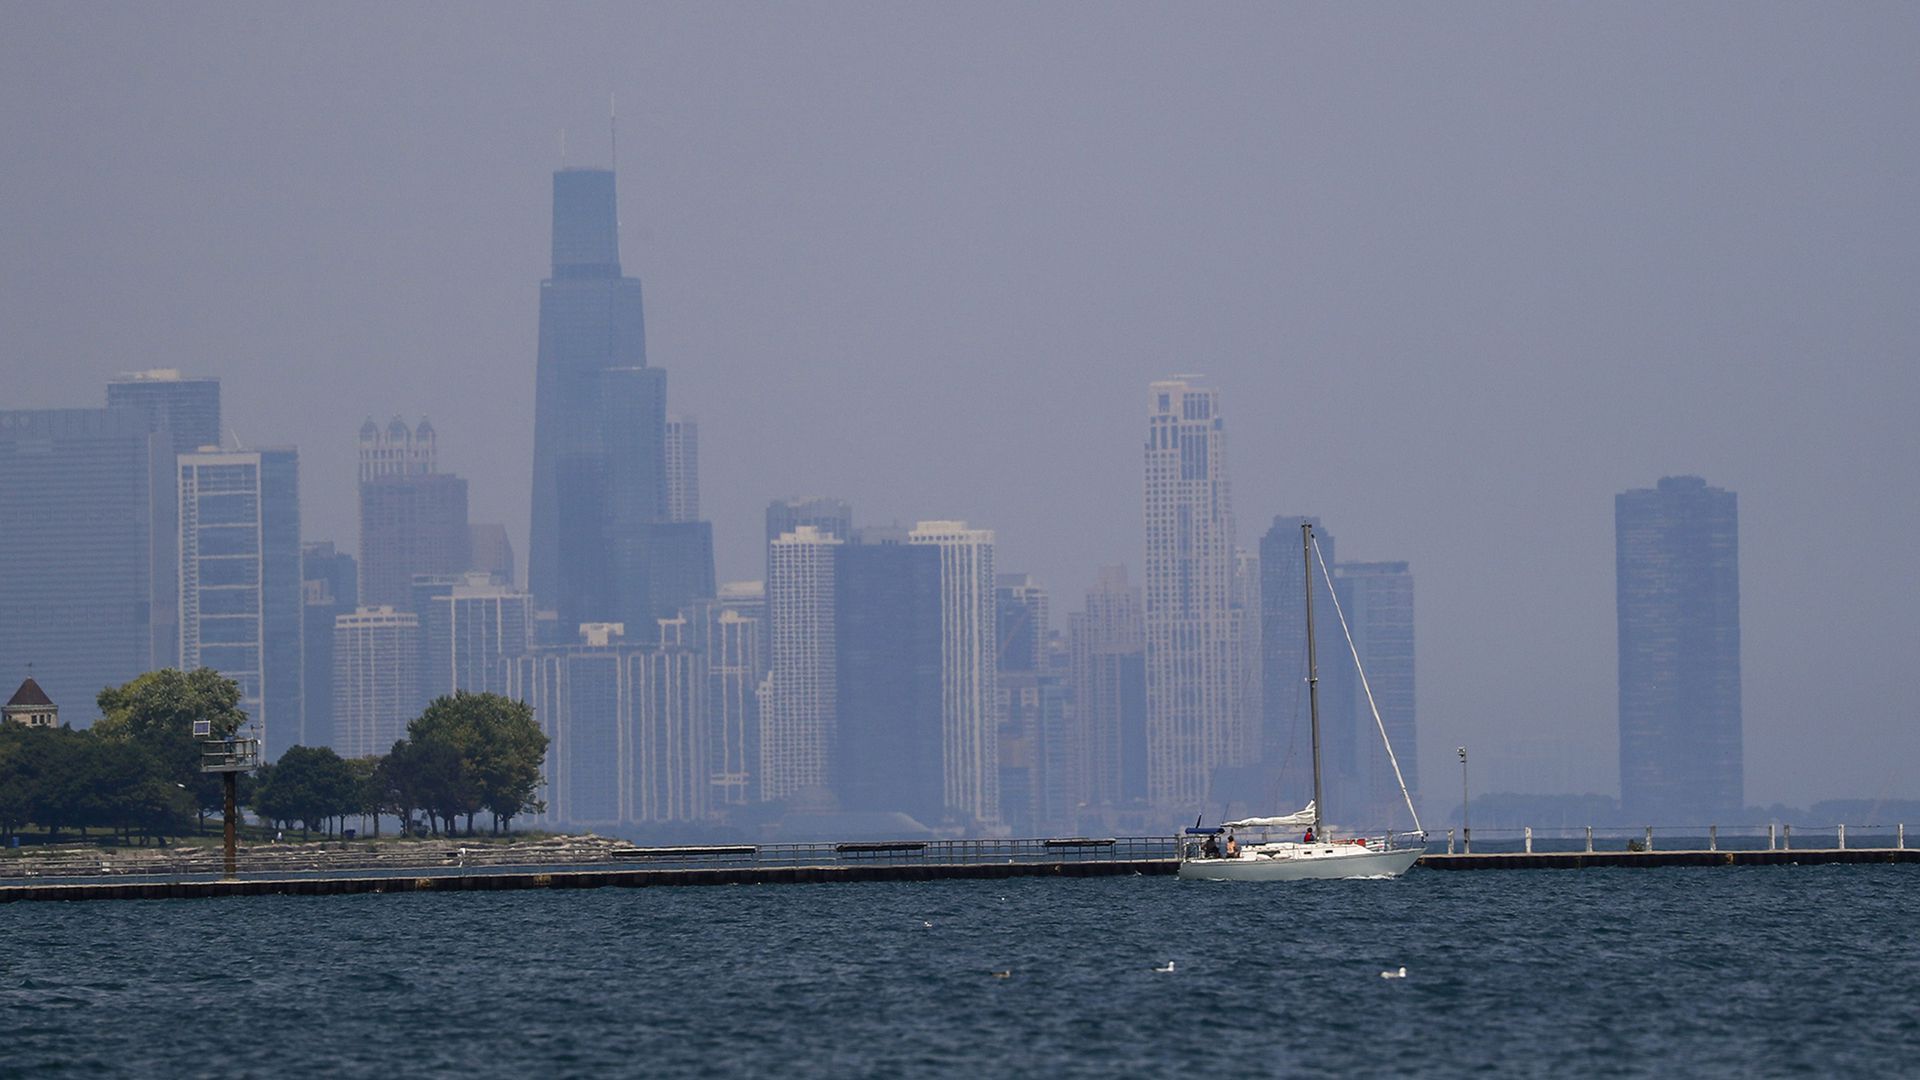 The Chicago skyline covered in haze